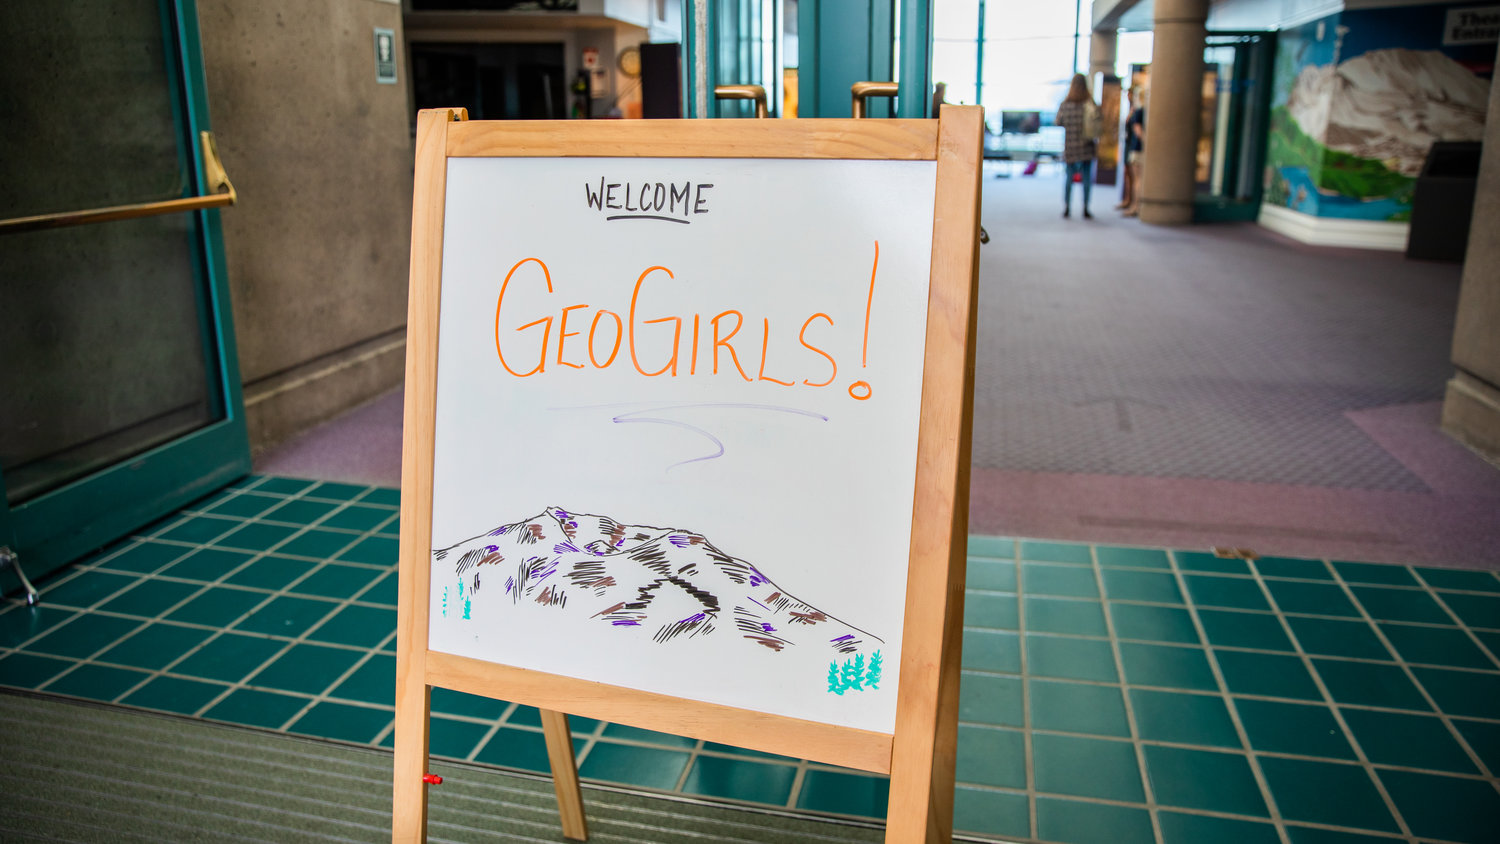 A sign welcomes GeoGirls to the Mount St. Helens Science and Learning Center at Coldwater.